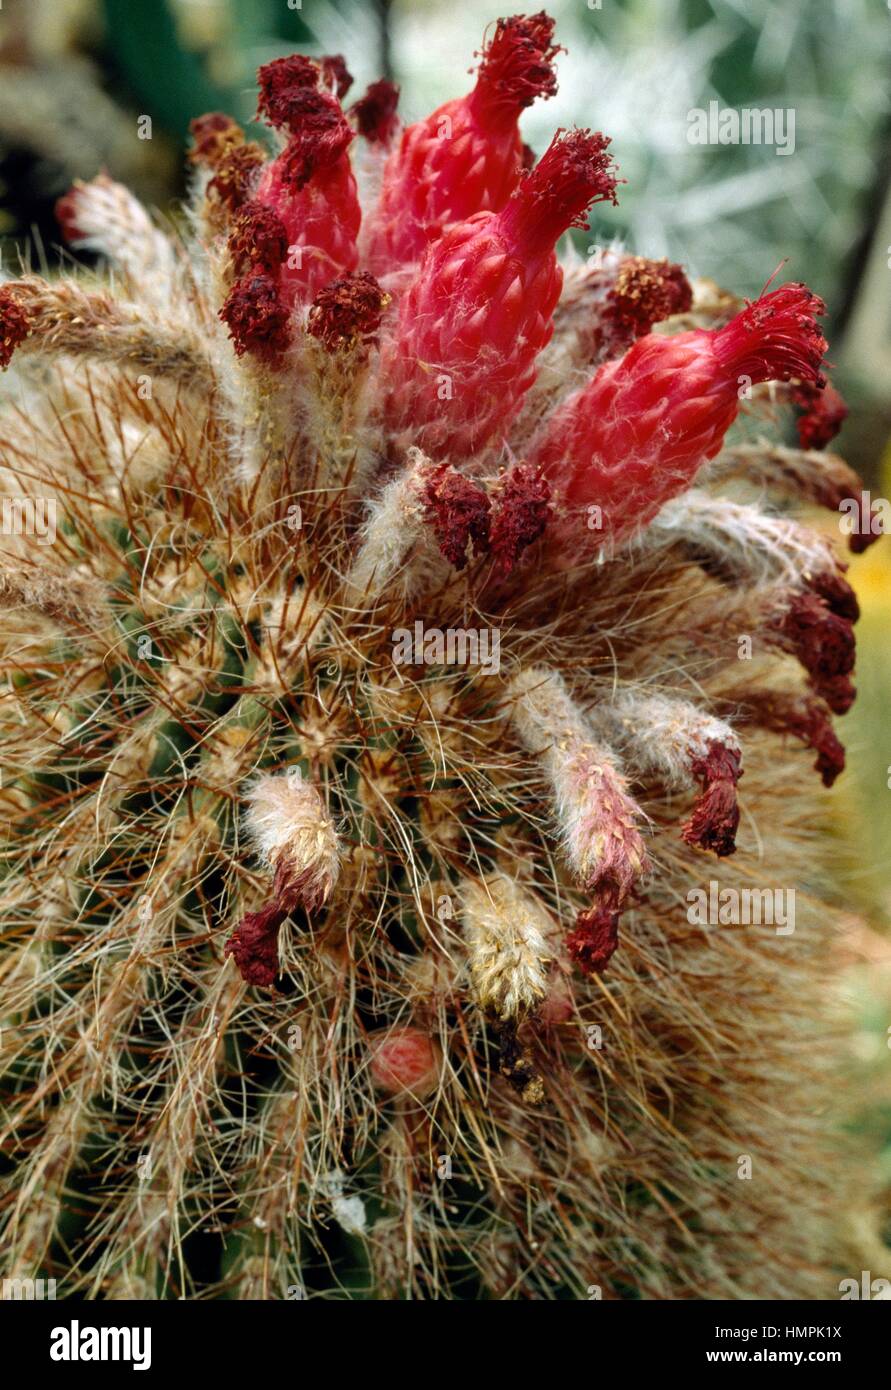 Denmoza erythrocephala, Cactaceae. Detail of flowers and spines. Stock Photo